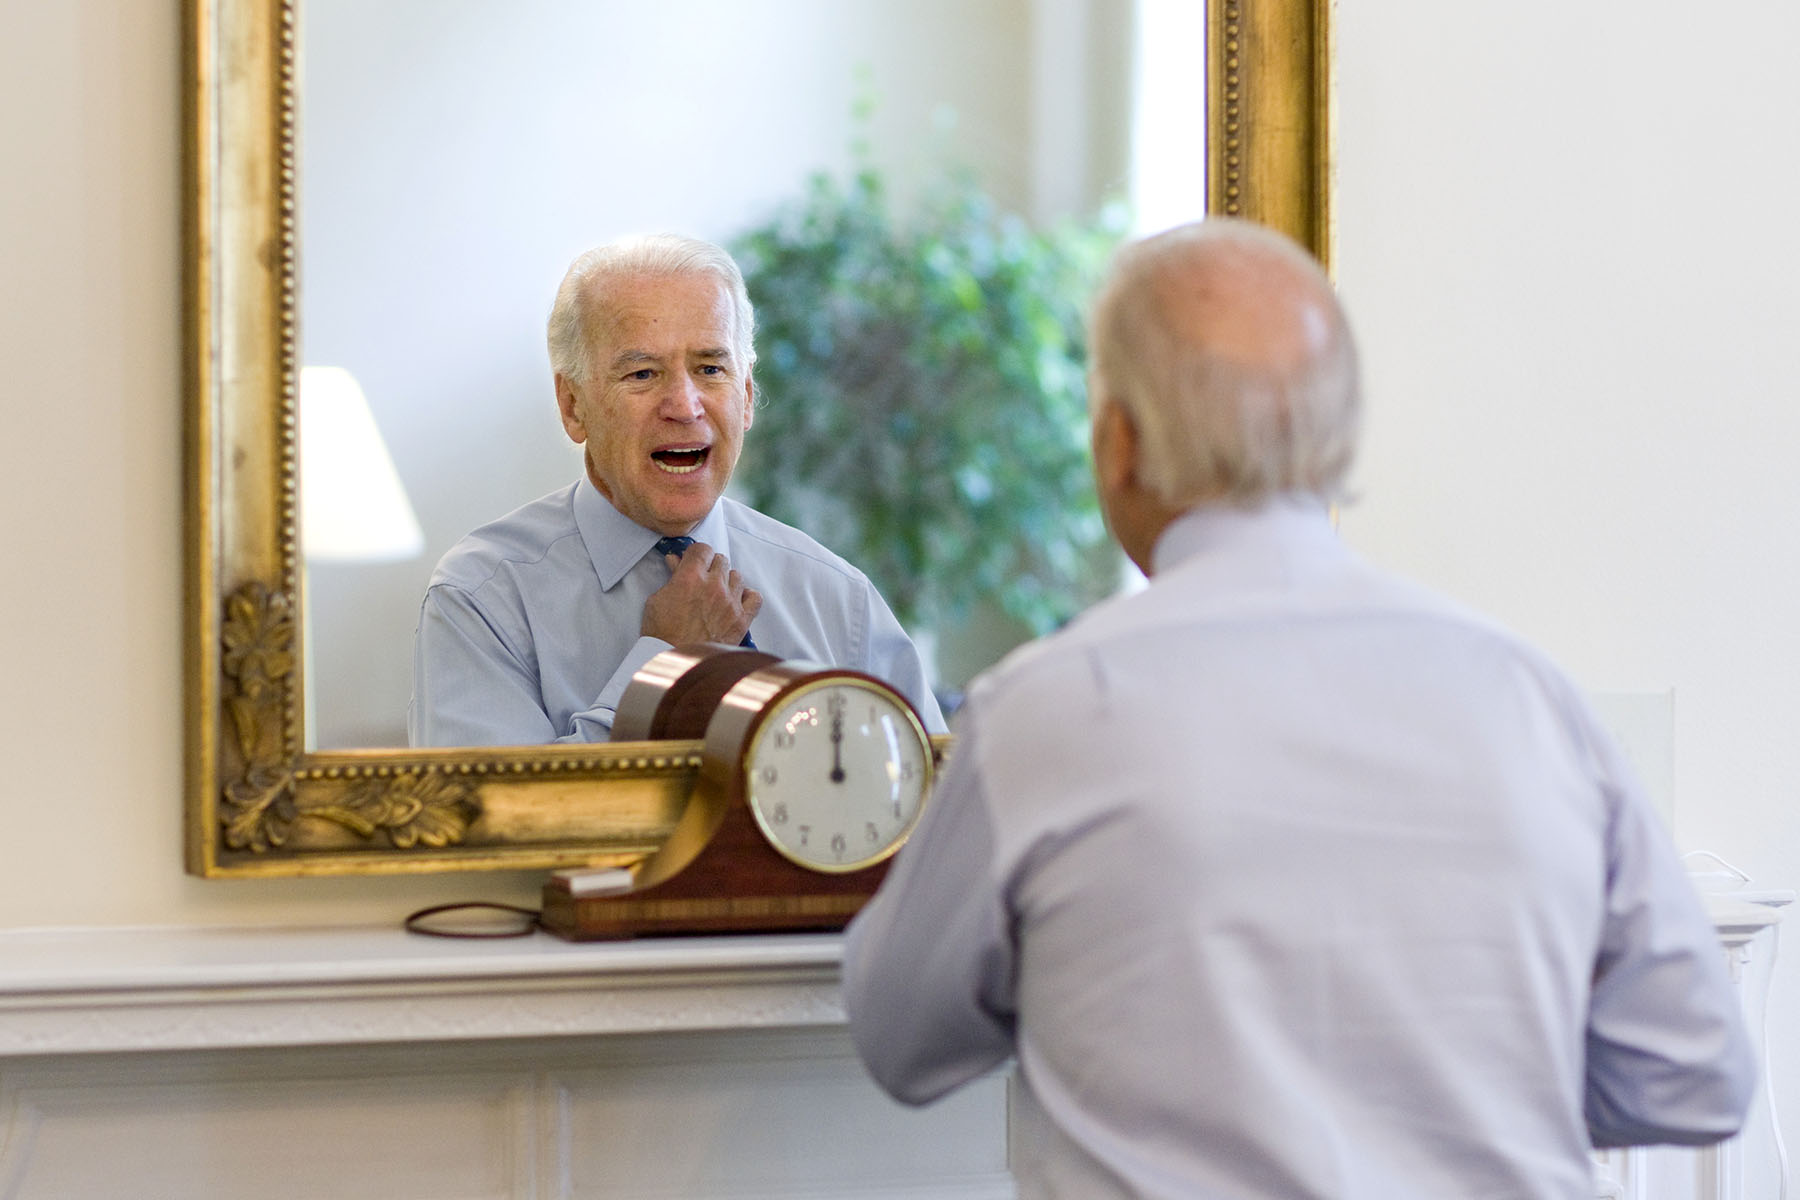 Vice President Joe Biden in his West Wing office at the White House in Washington.Photo by Brooks Kraft/Corbis